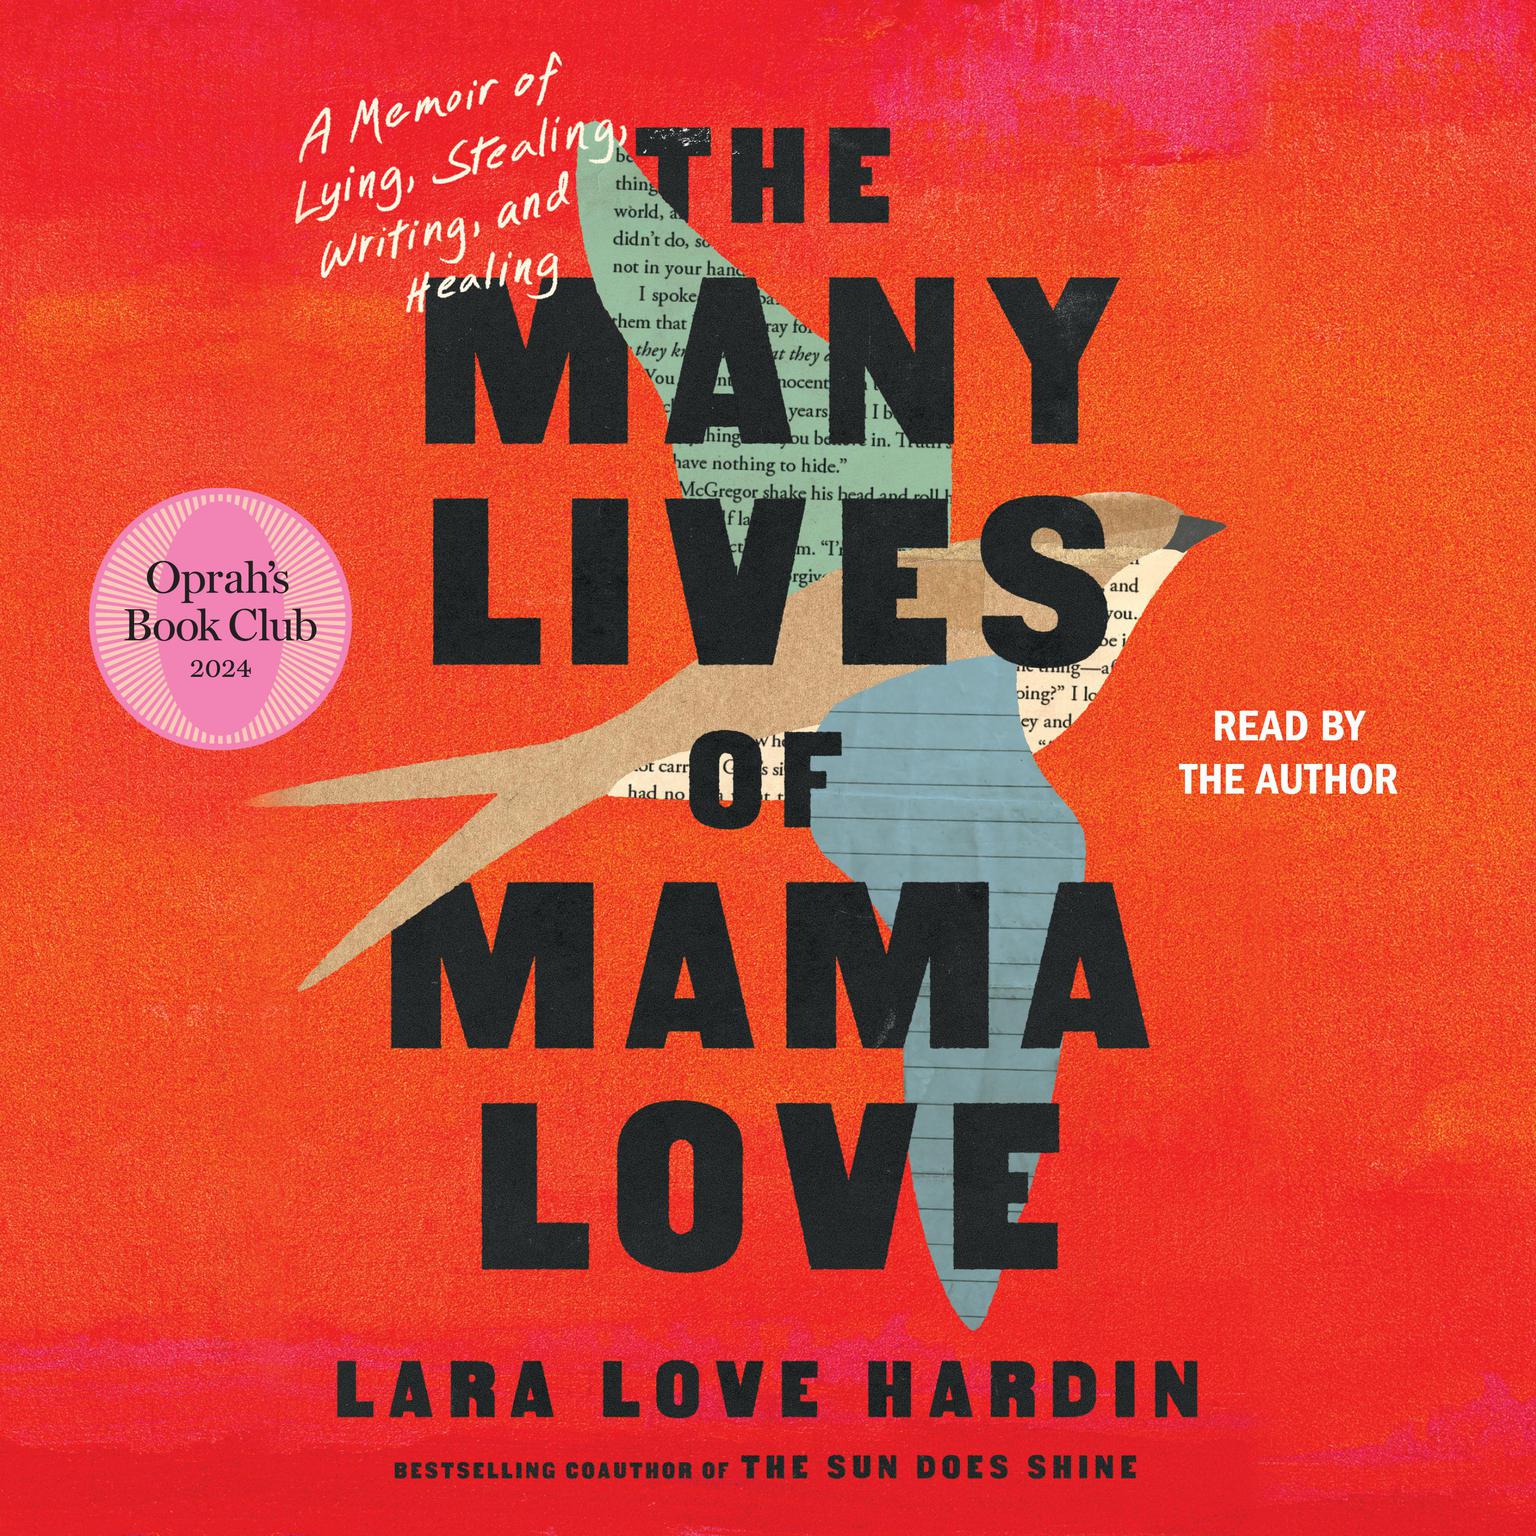 The Many Lives of Mama Love: A Memoir of Lying, Stealing, Writing, and Healing Audiobook, by Lara Love Hardin